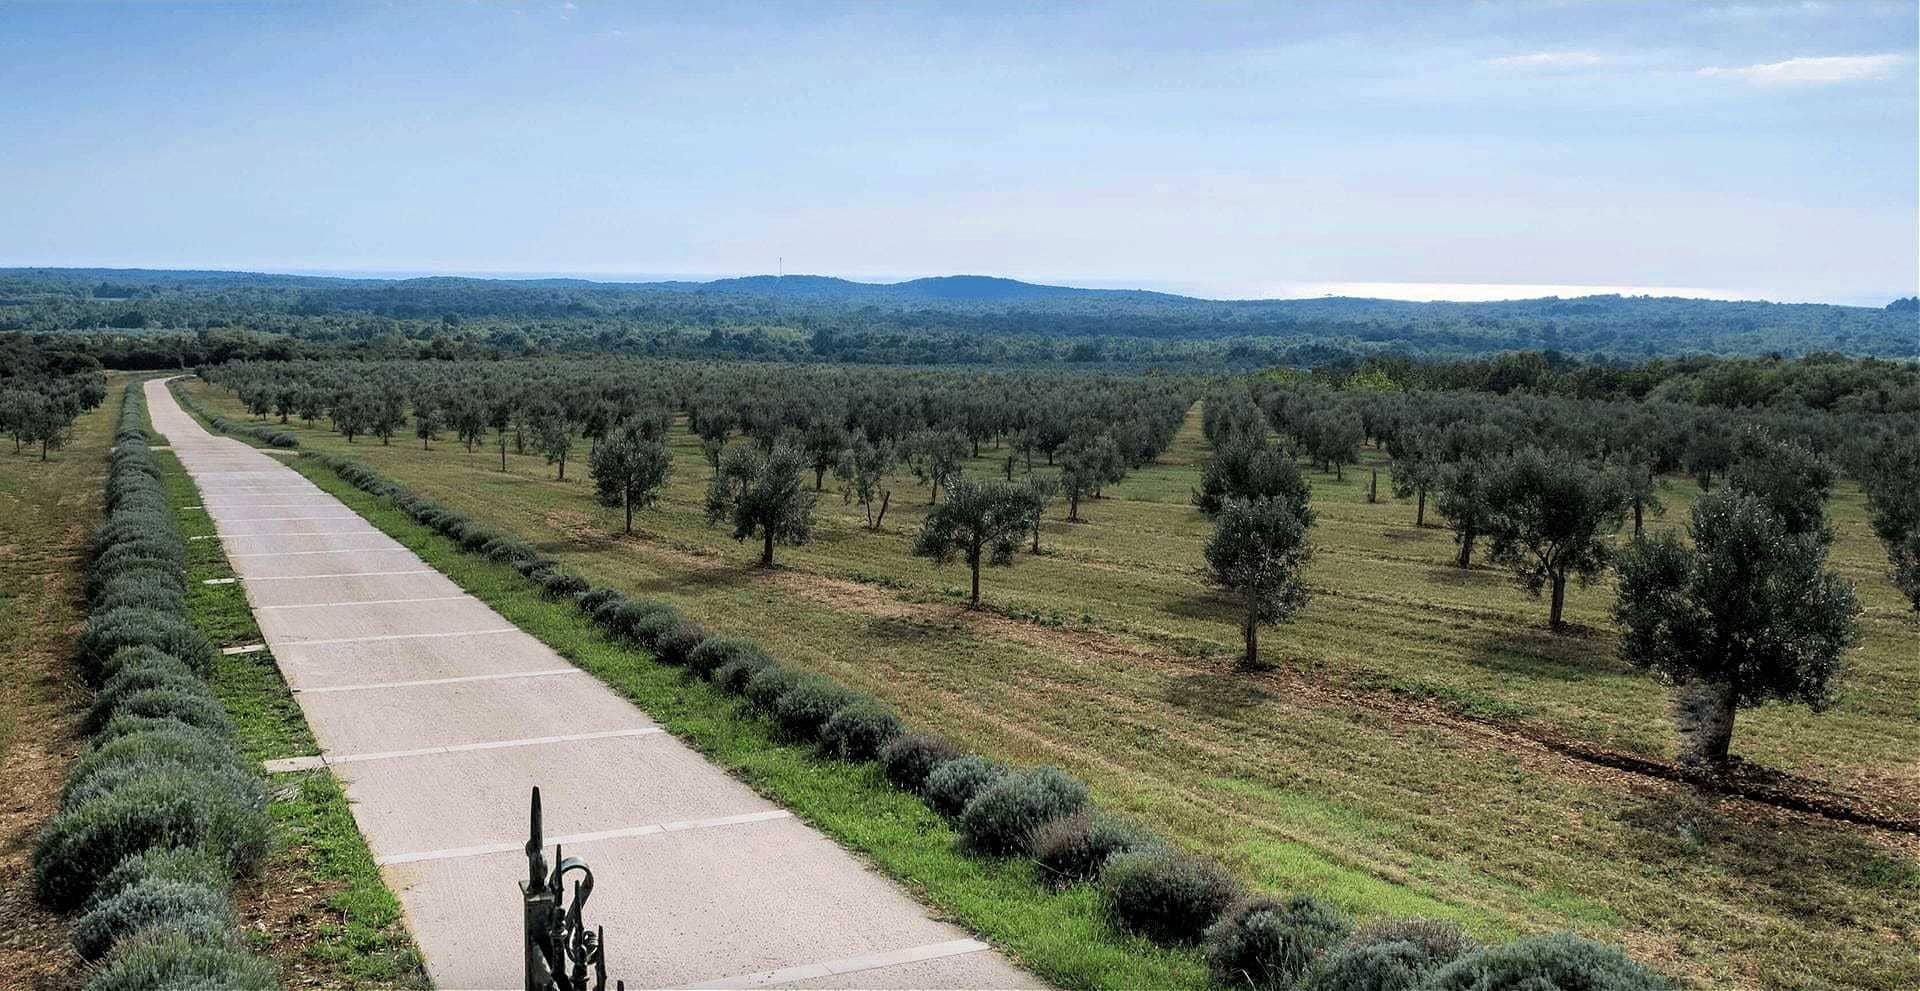 europe-the-best-olive-oils-competitions-croatian-producers-celebrate-87-wins-at-world-competition-olive-oil-times